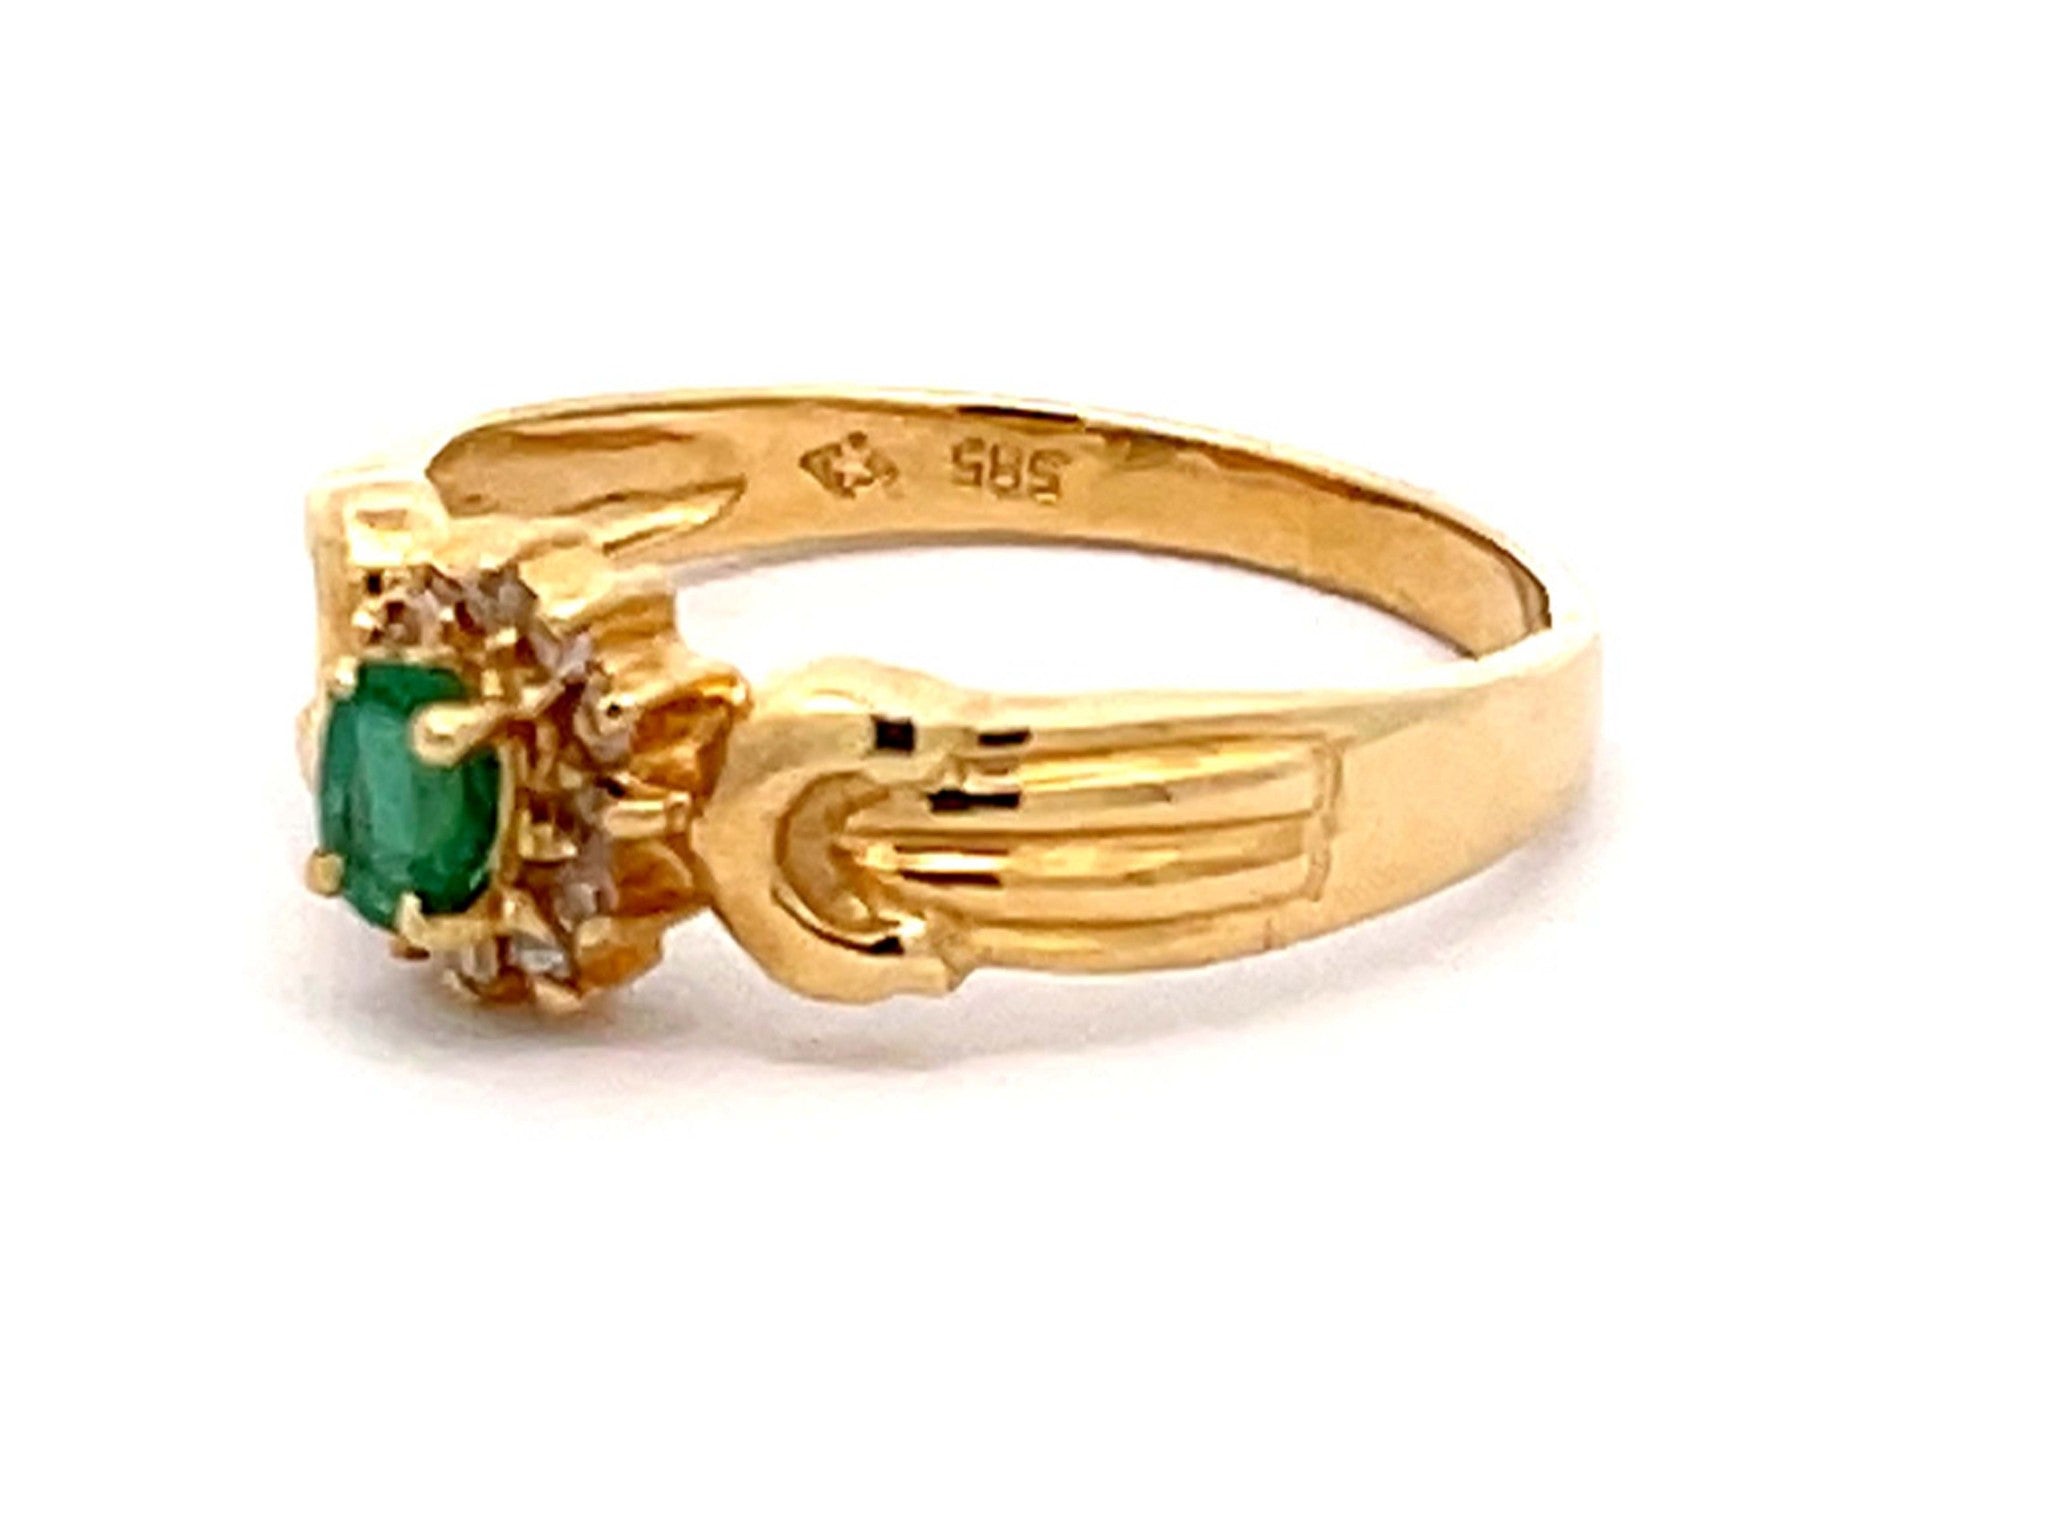 Vintage Green Oval Emerald and Diamond Halo Ring in 14k Yellow Gold